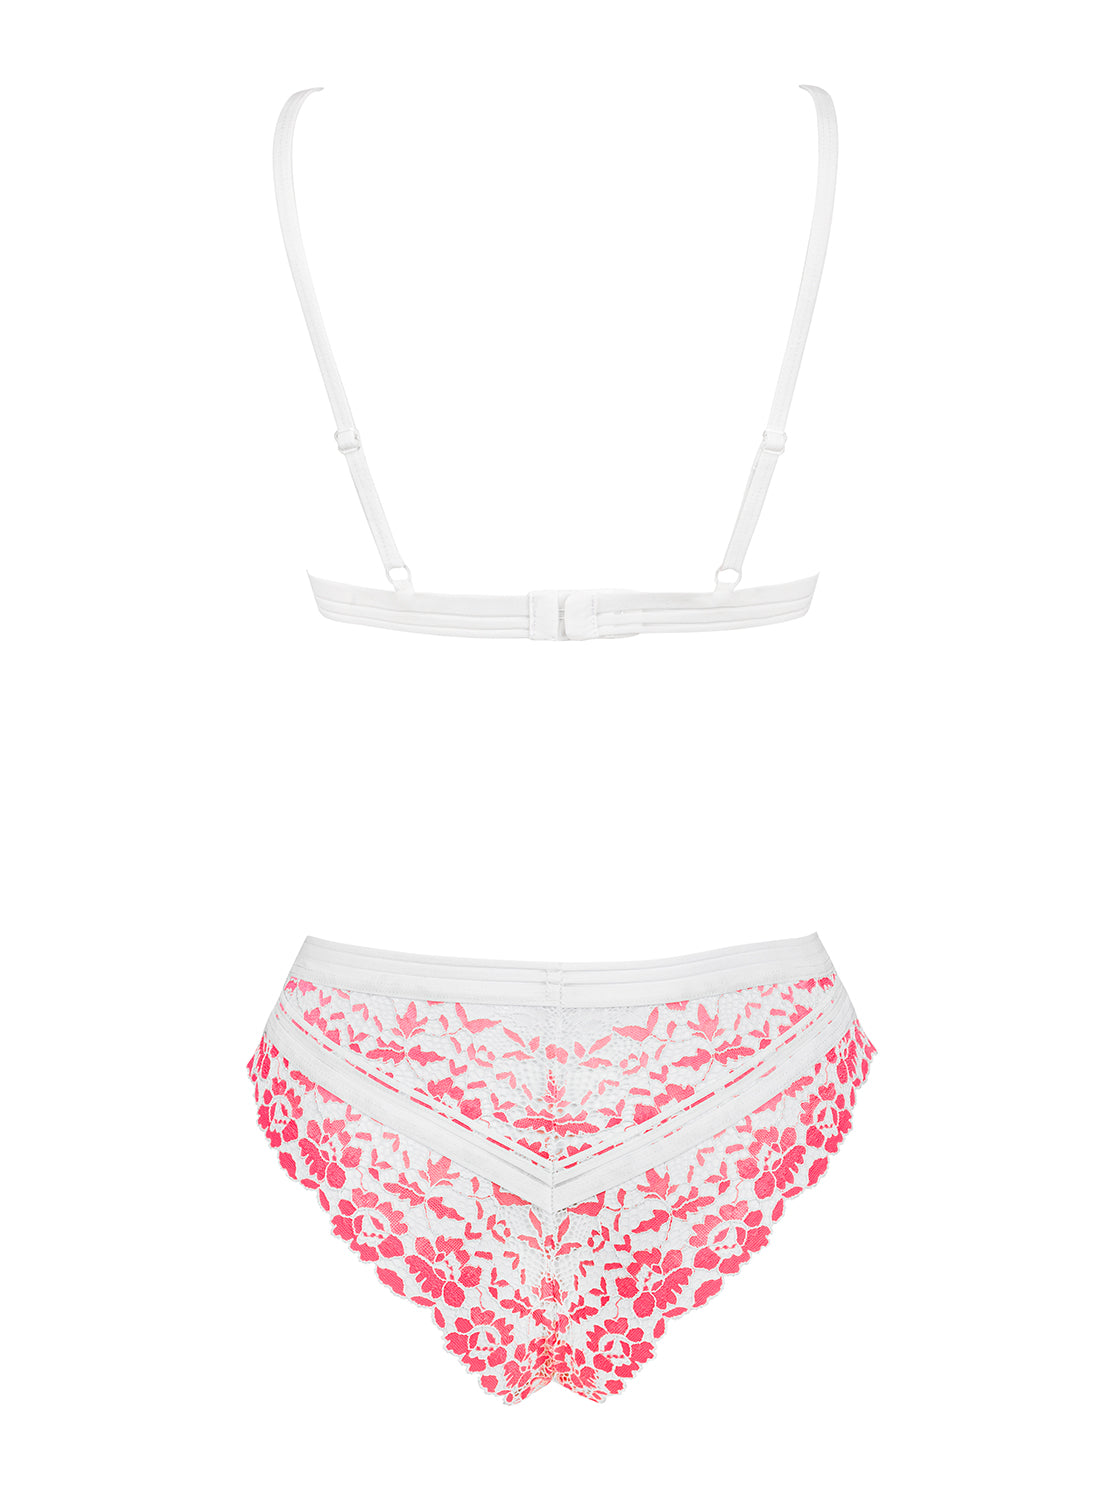 Bloomys a beautiful pink set made of soft and elastic material with delicate floral lace